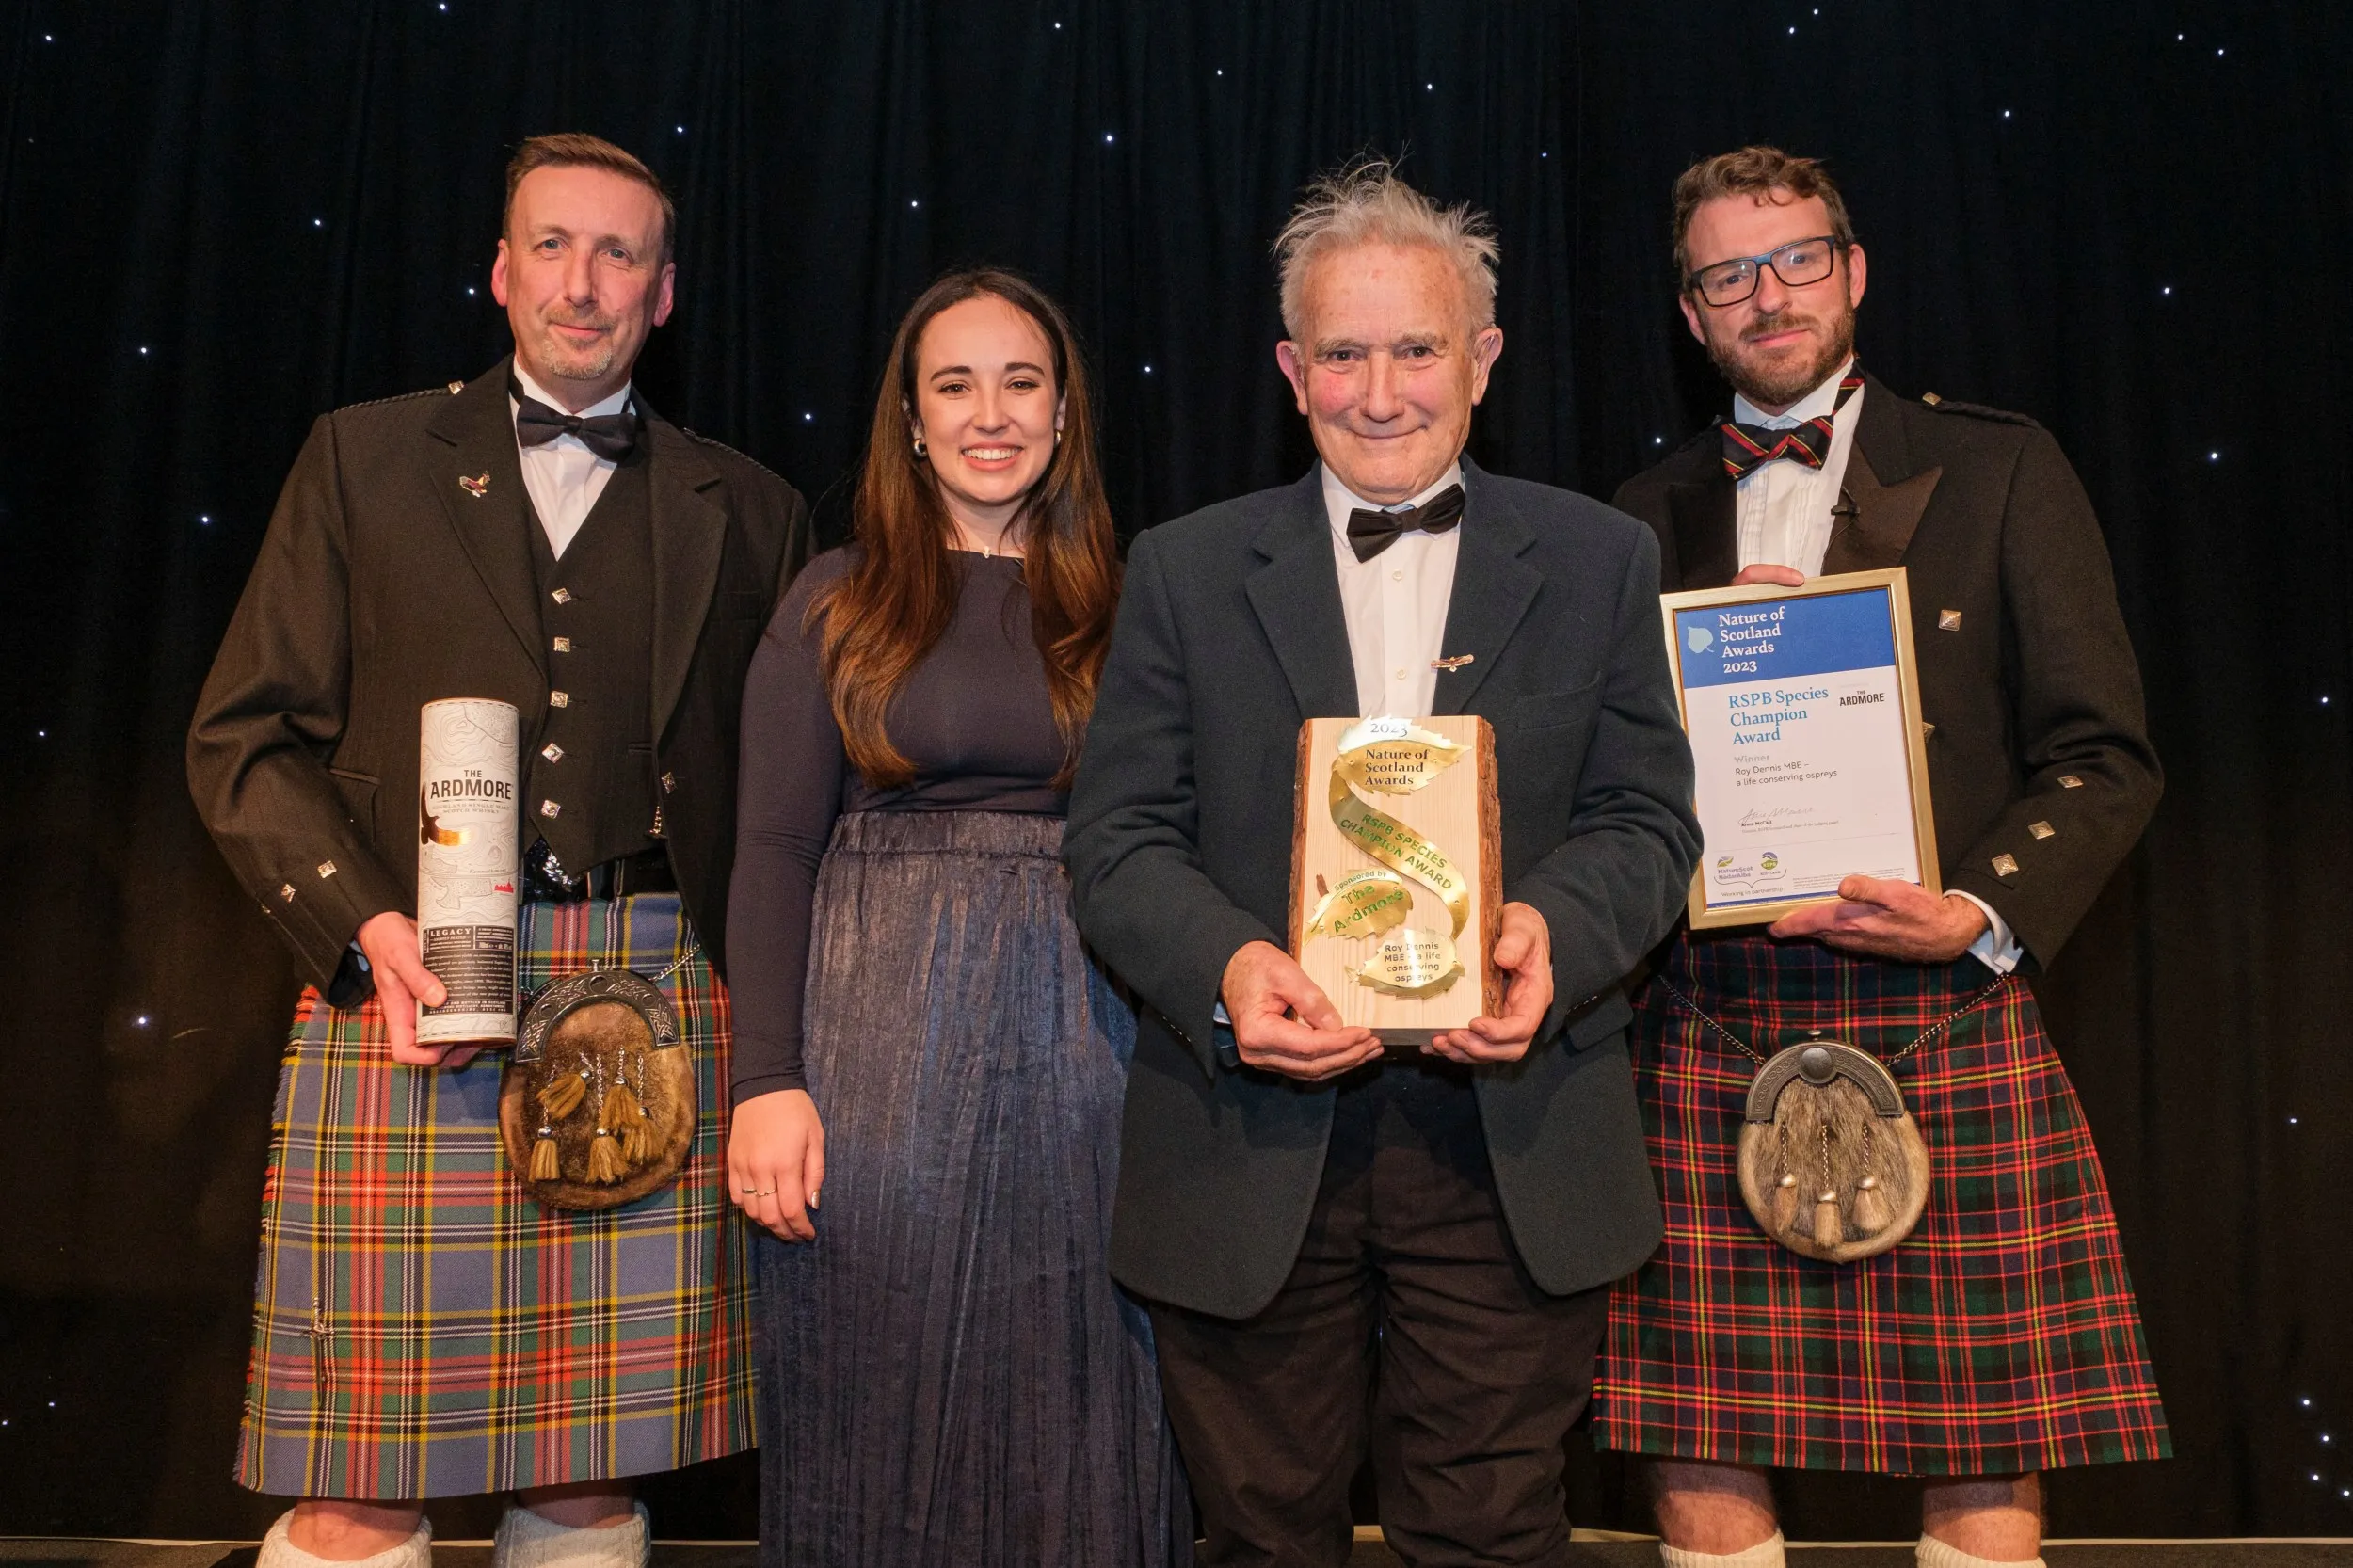 4 people, smiling towards the camera, one holds a trophy, one a certificate, and the other a bottle of The Ardmore whisky